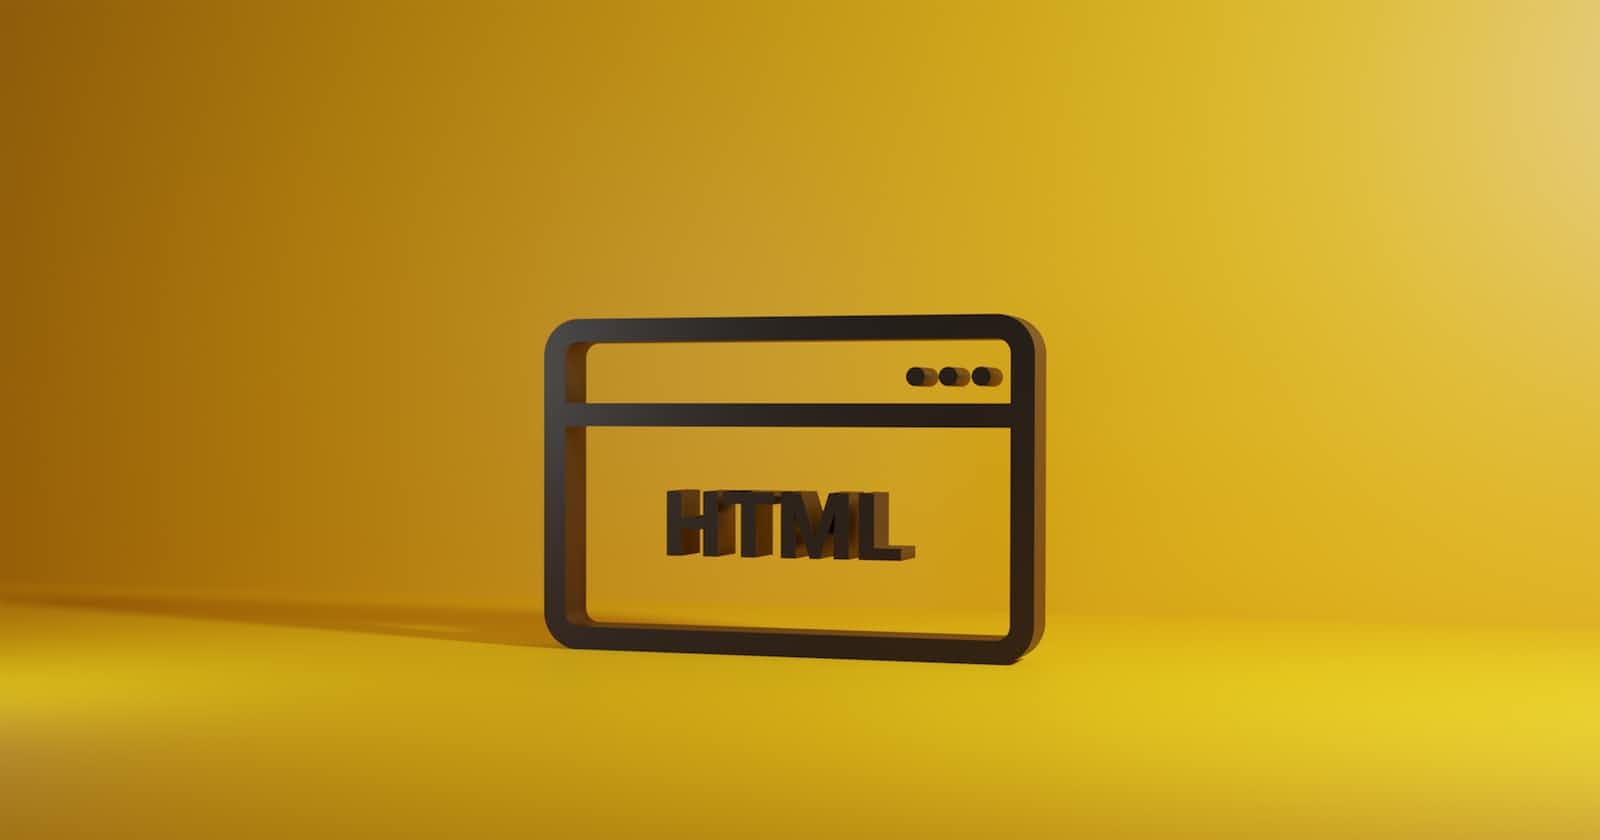 What Is HTML